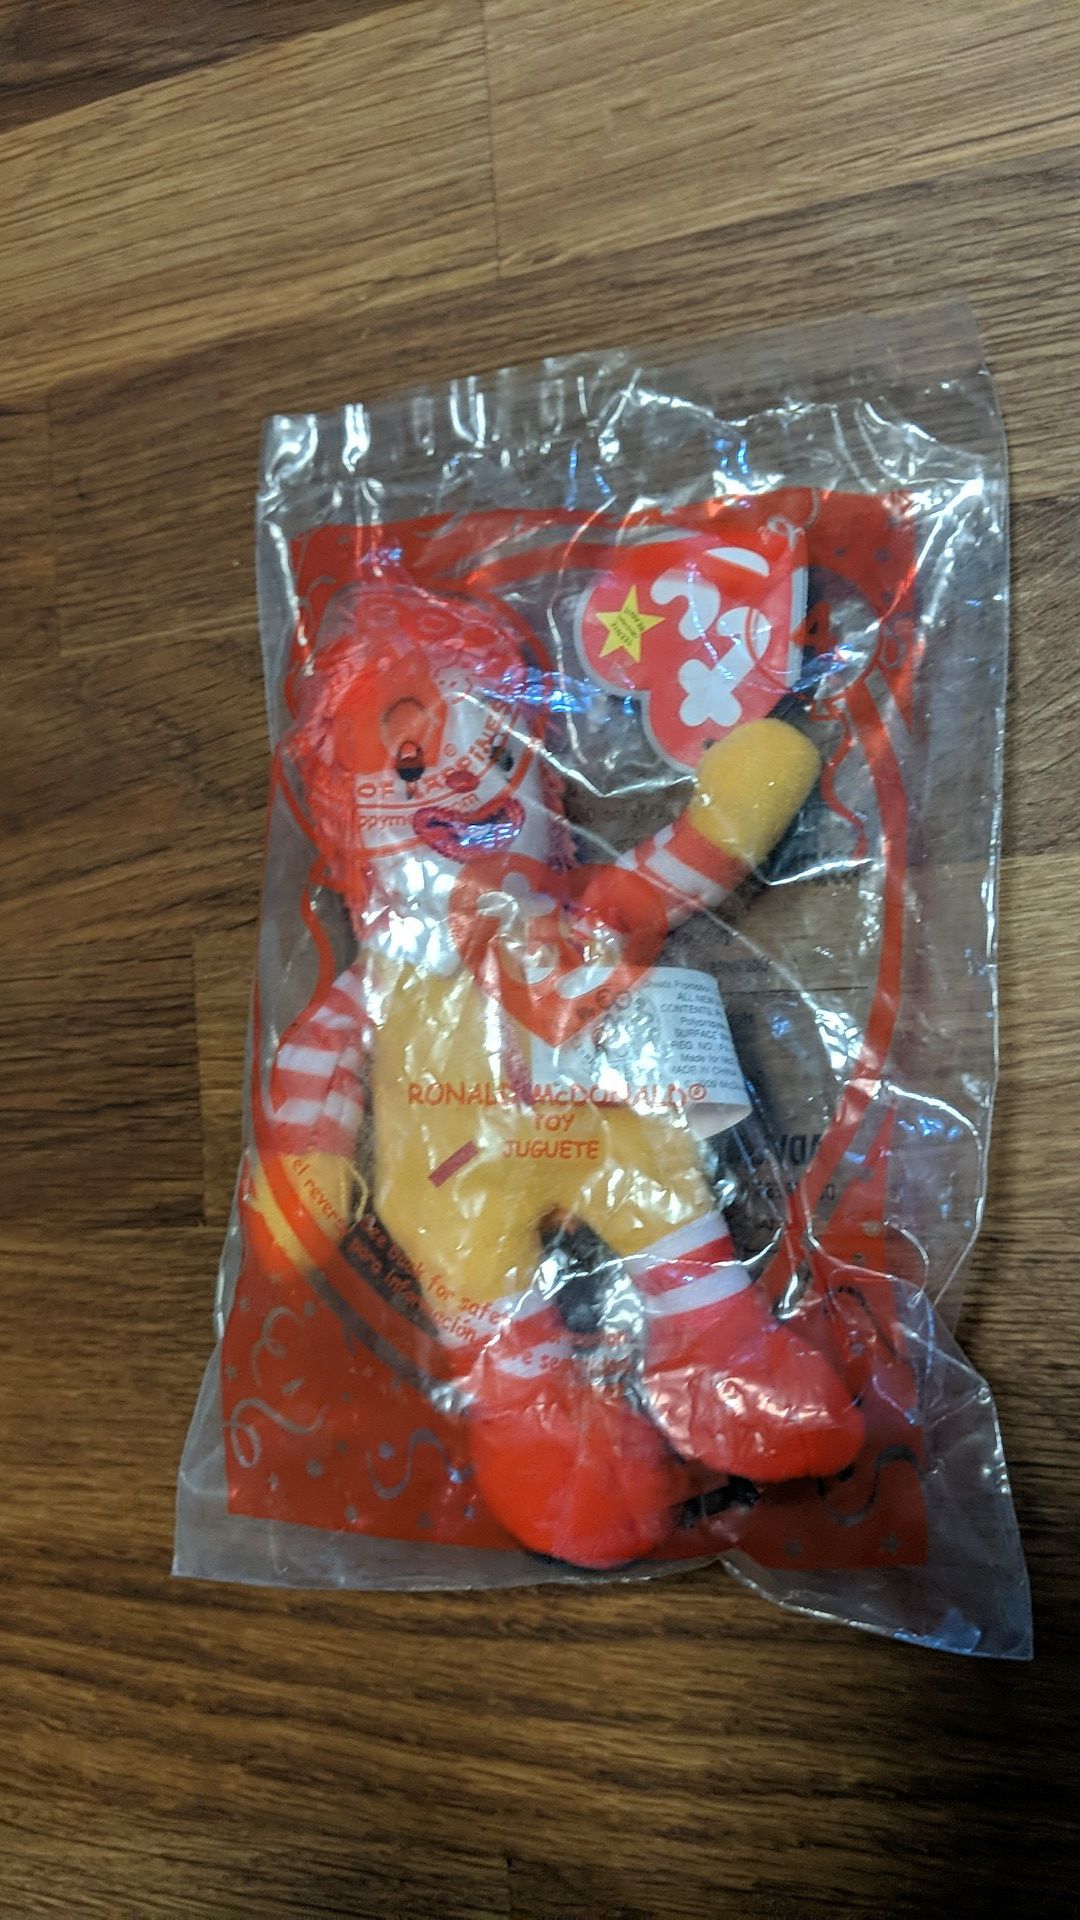 Collectible "Ronald McDonald" McDonald’s Happy Meal 2009 Ty Beanie Toy - Brand New/Sealed